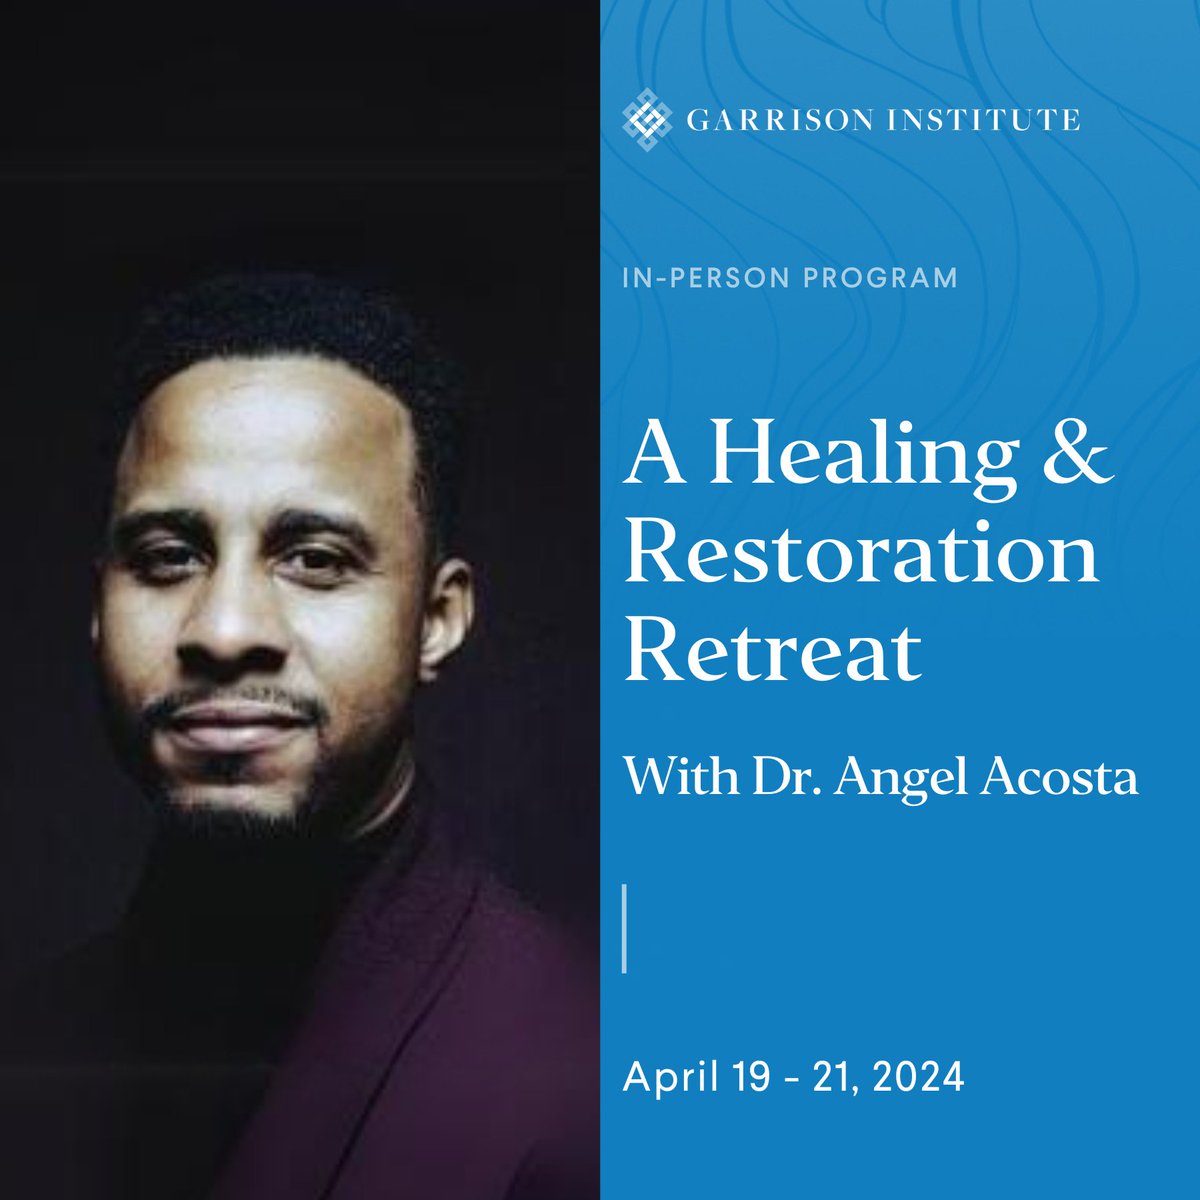 We are honored to present the Healing & Restoration Retreat, a three-day event created in partnership with the Acosta Institute. The retreat aims to provide a sanctuary for educators, leaders, and changemakers experiencing burnout. Sign up & learn more: garrisoninstitute.org/event/in-perso…